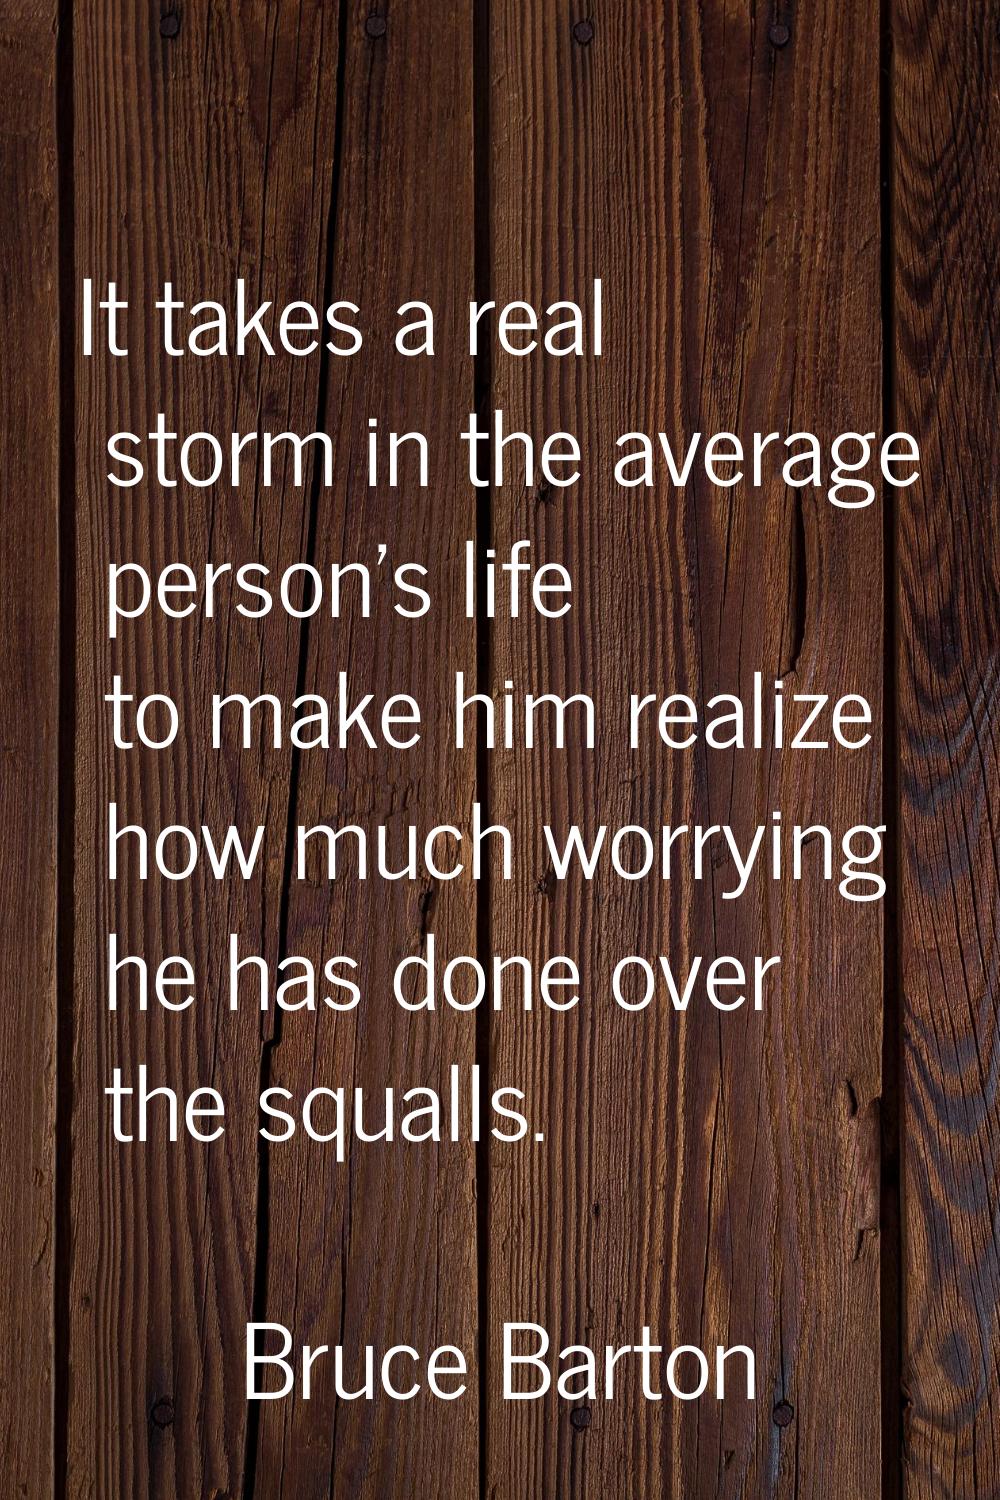 It takes a real storm in the average person's life to make him realize how much worrying he has don